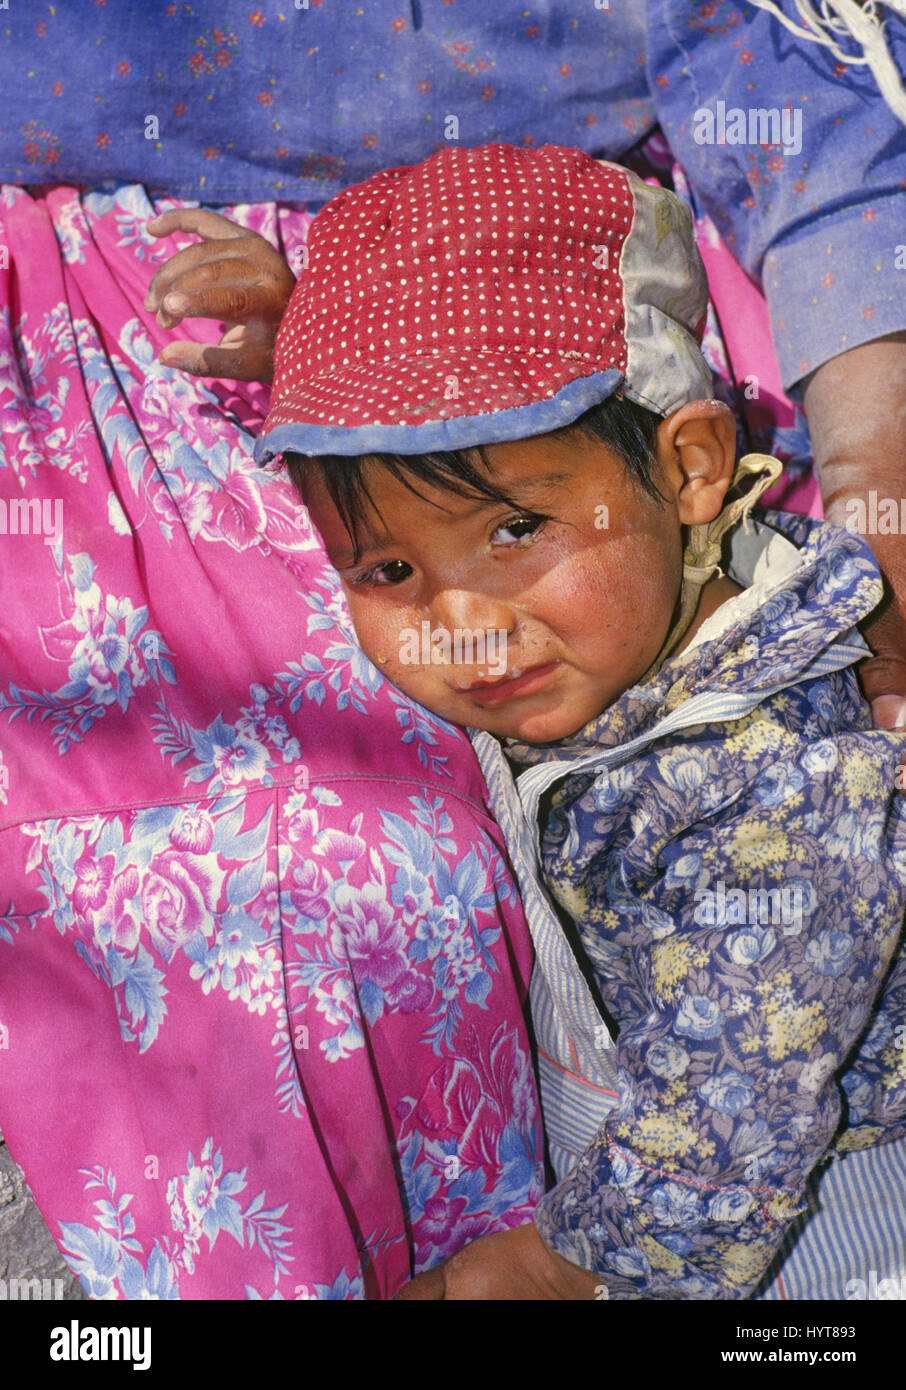 Unreleased image. for editorial usage only. A young Tarahumara  Indian boy with a runny nose holds on to his mother, in Copper Canyon, Mexico Stock Photo